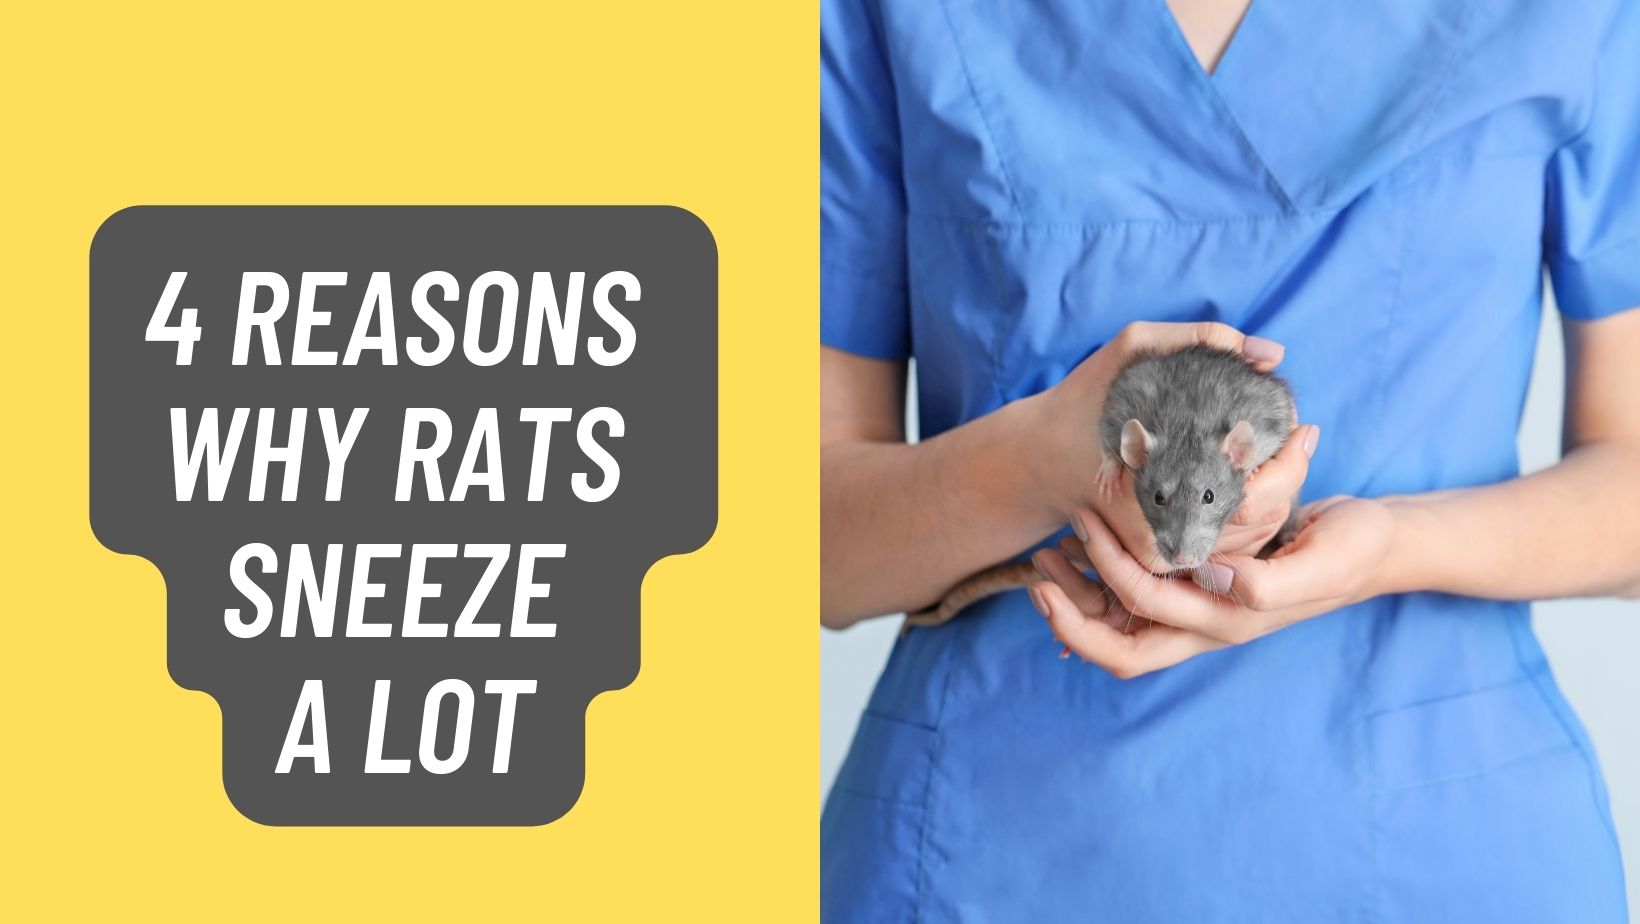 Reasons Why Rats Sneeze a Lot